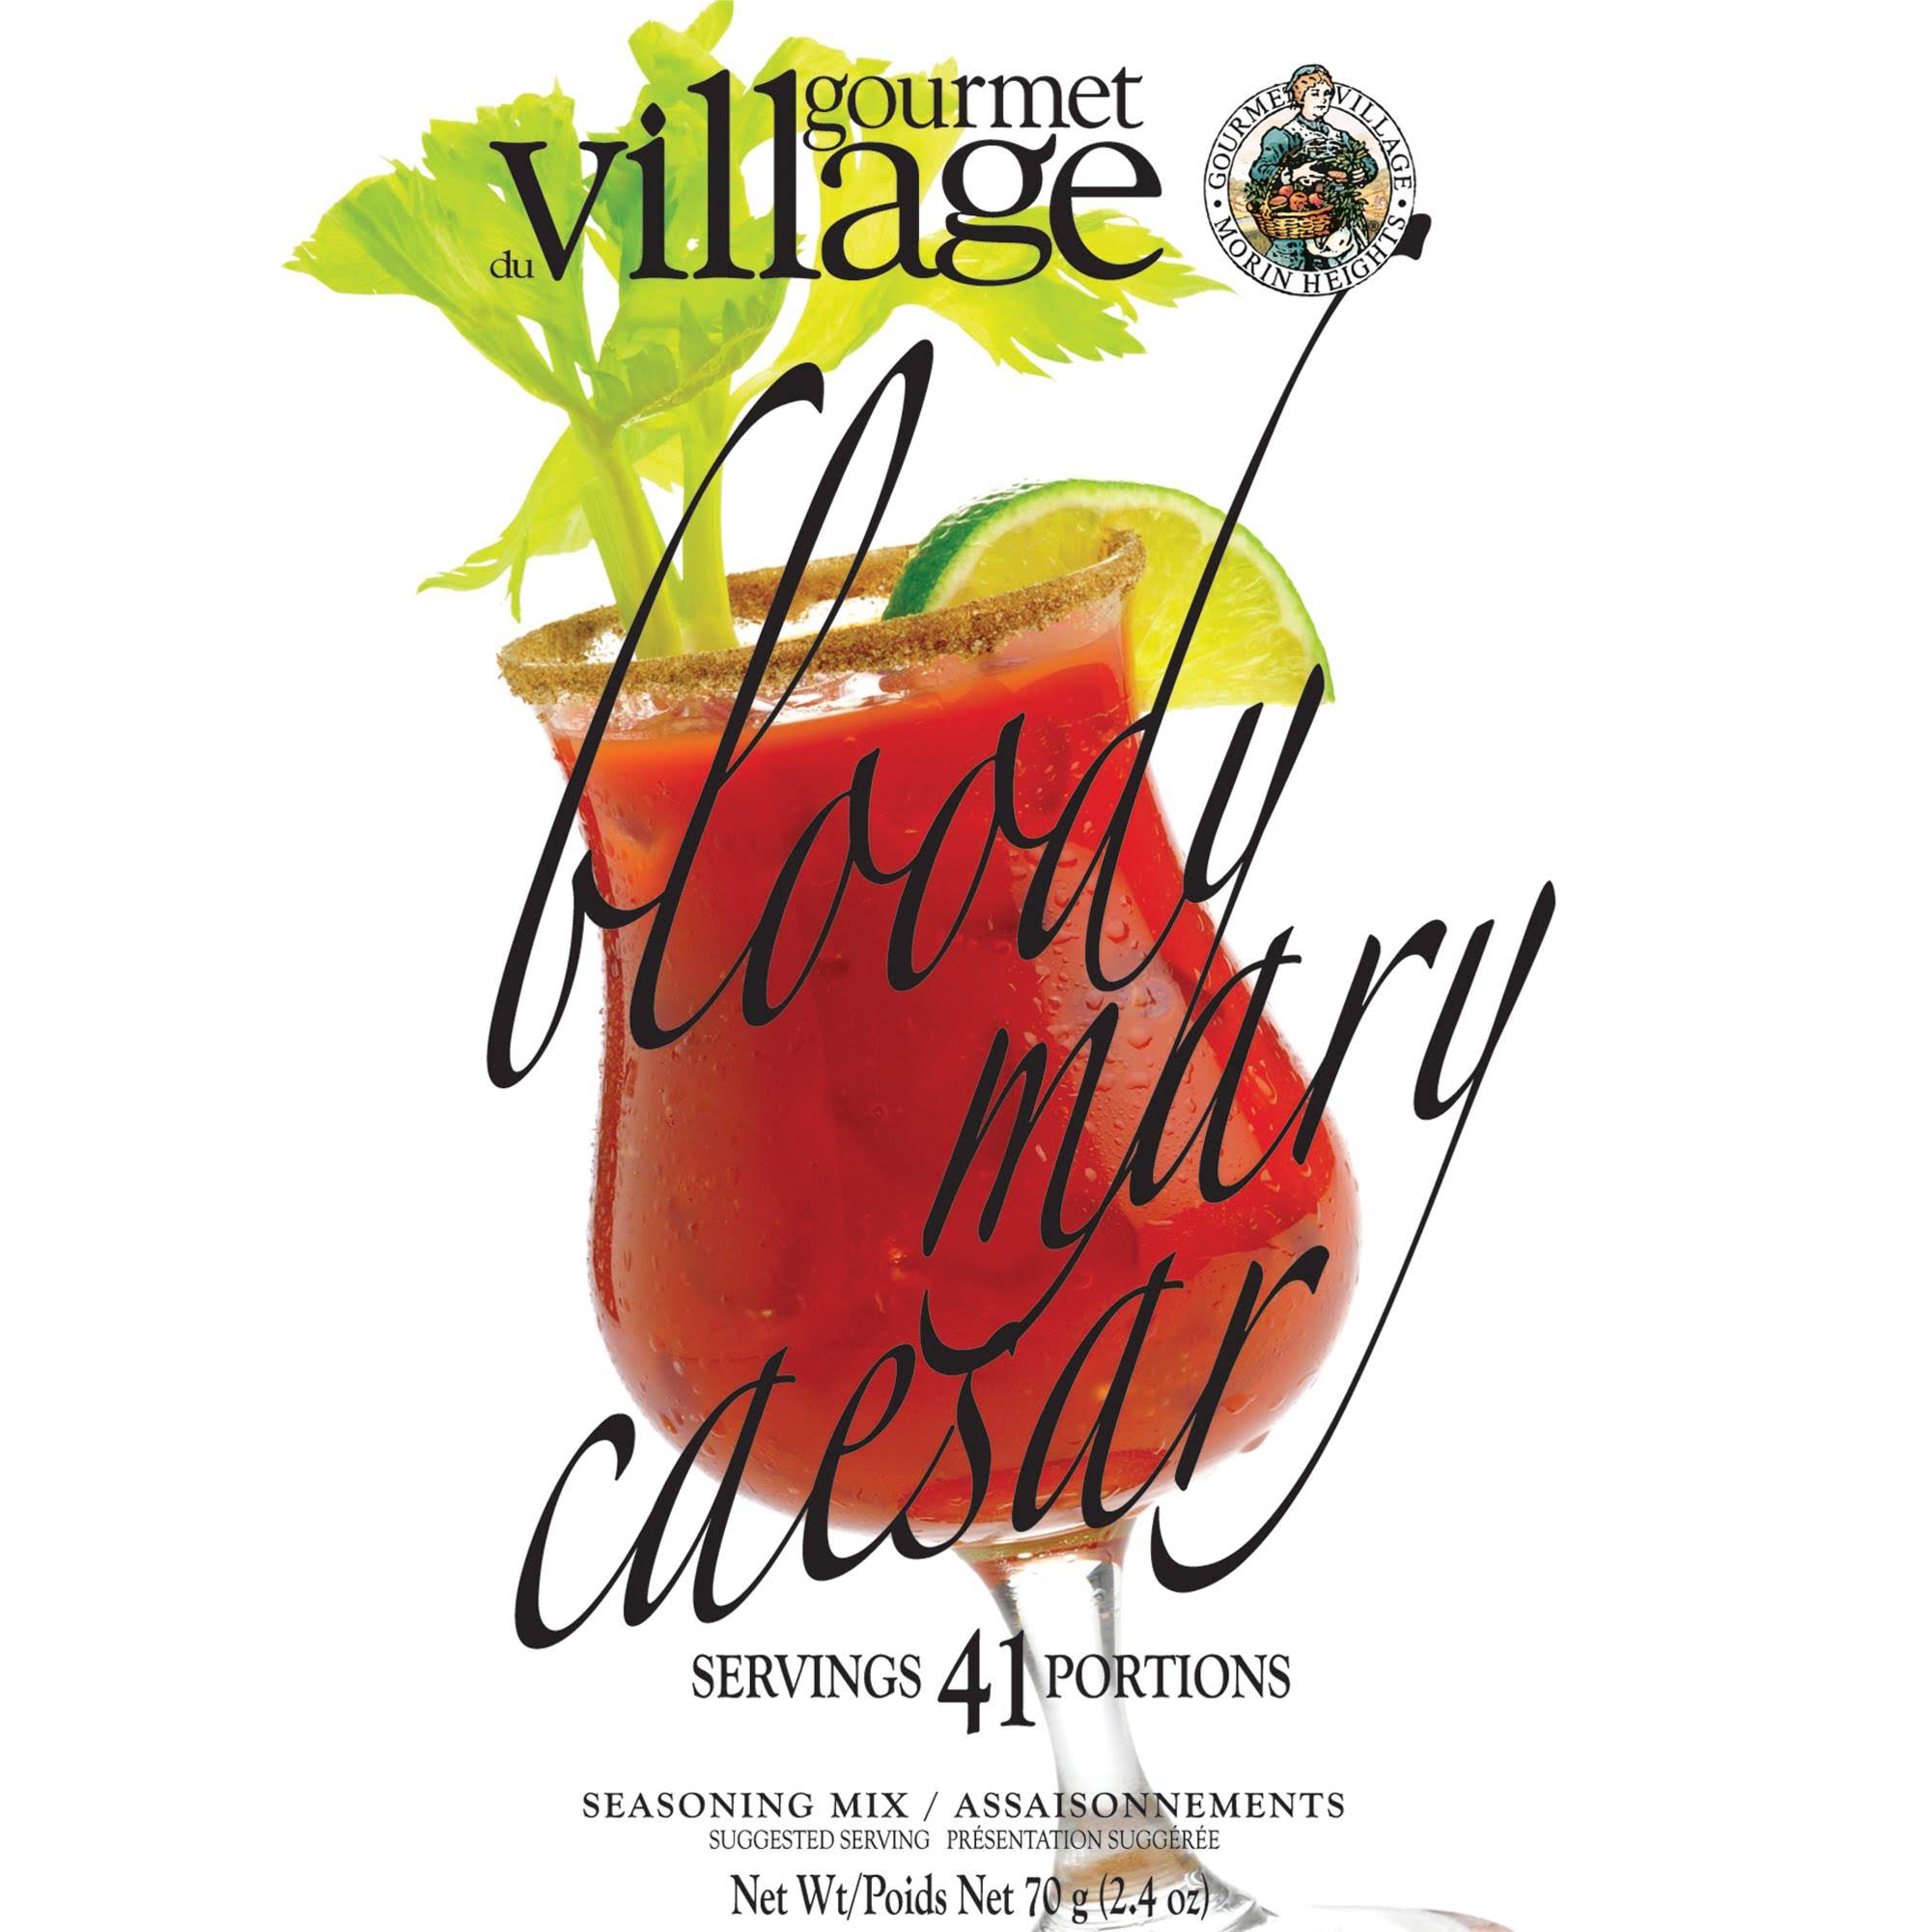 Gourmet Du Village Cool Drinks 'Bloody Mary' Drink Mix